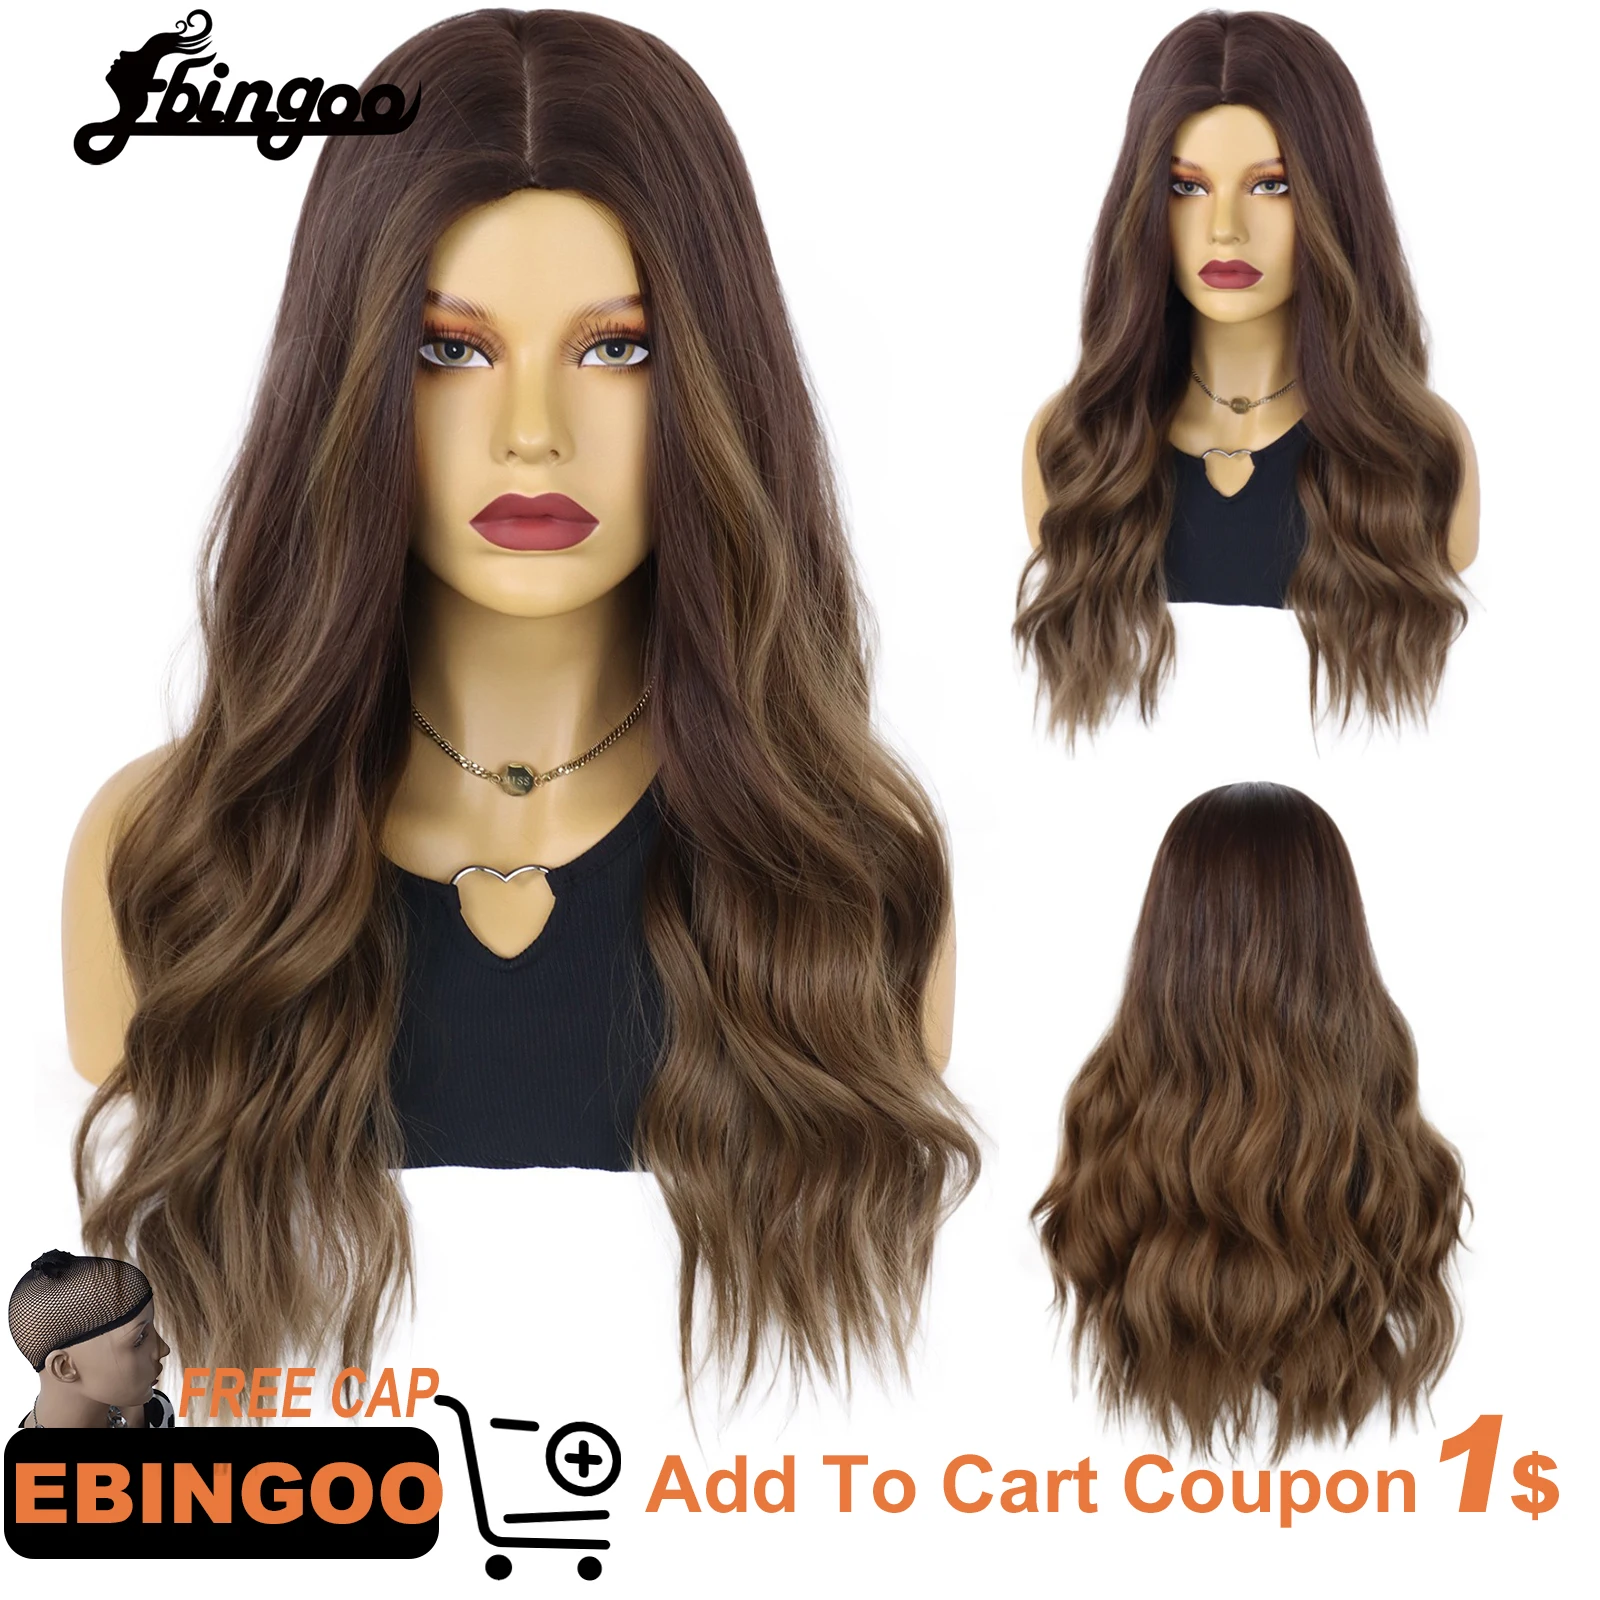 Ebingoo Synthetic 28INCH Gray Brown Color Body Wave Middle Part Wigs Heat Resistant Fiber Full Machine Made Hair Wigs for Women